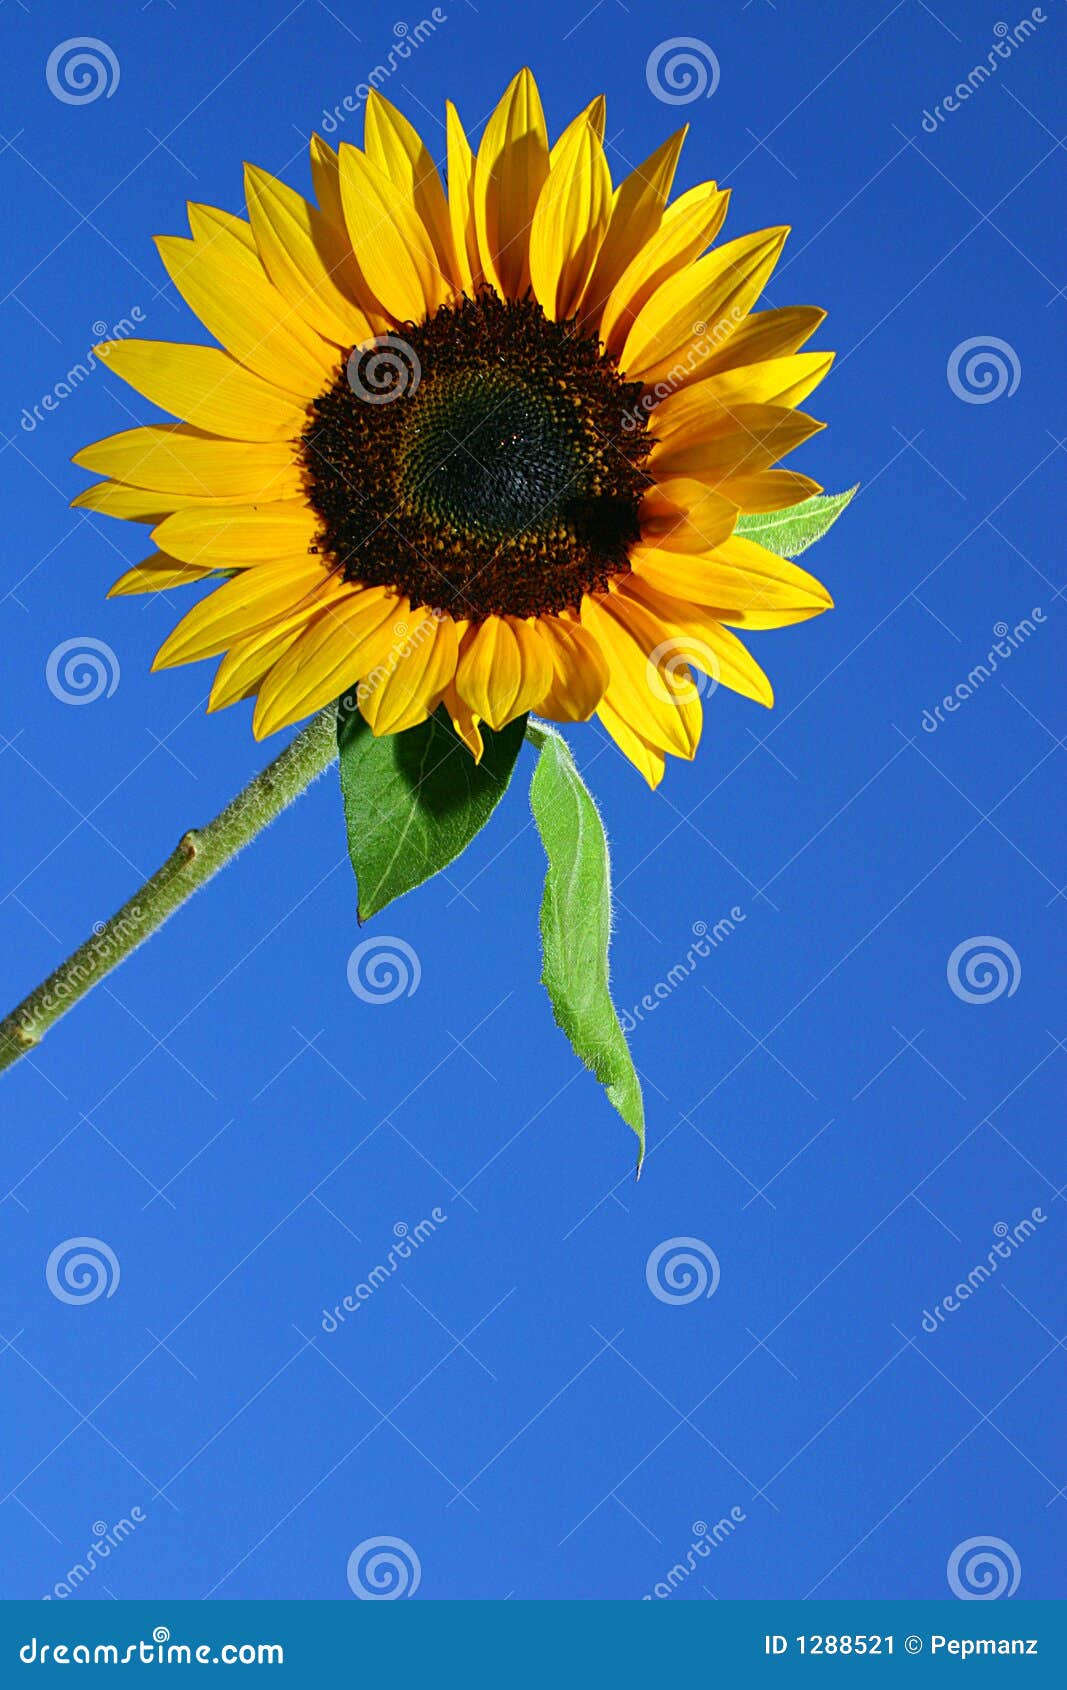 SUNFLOWER AND BLUE SKY Stock Image - Image: 1288521